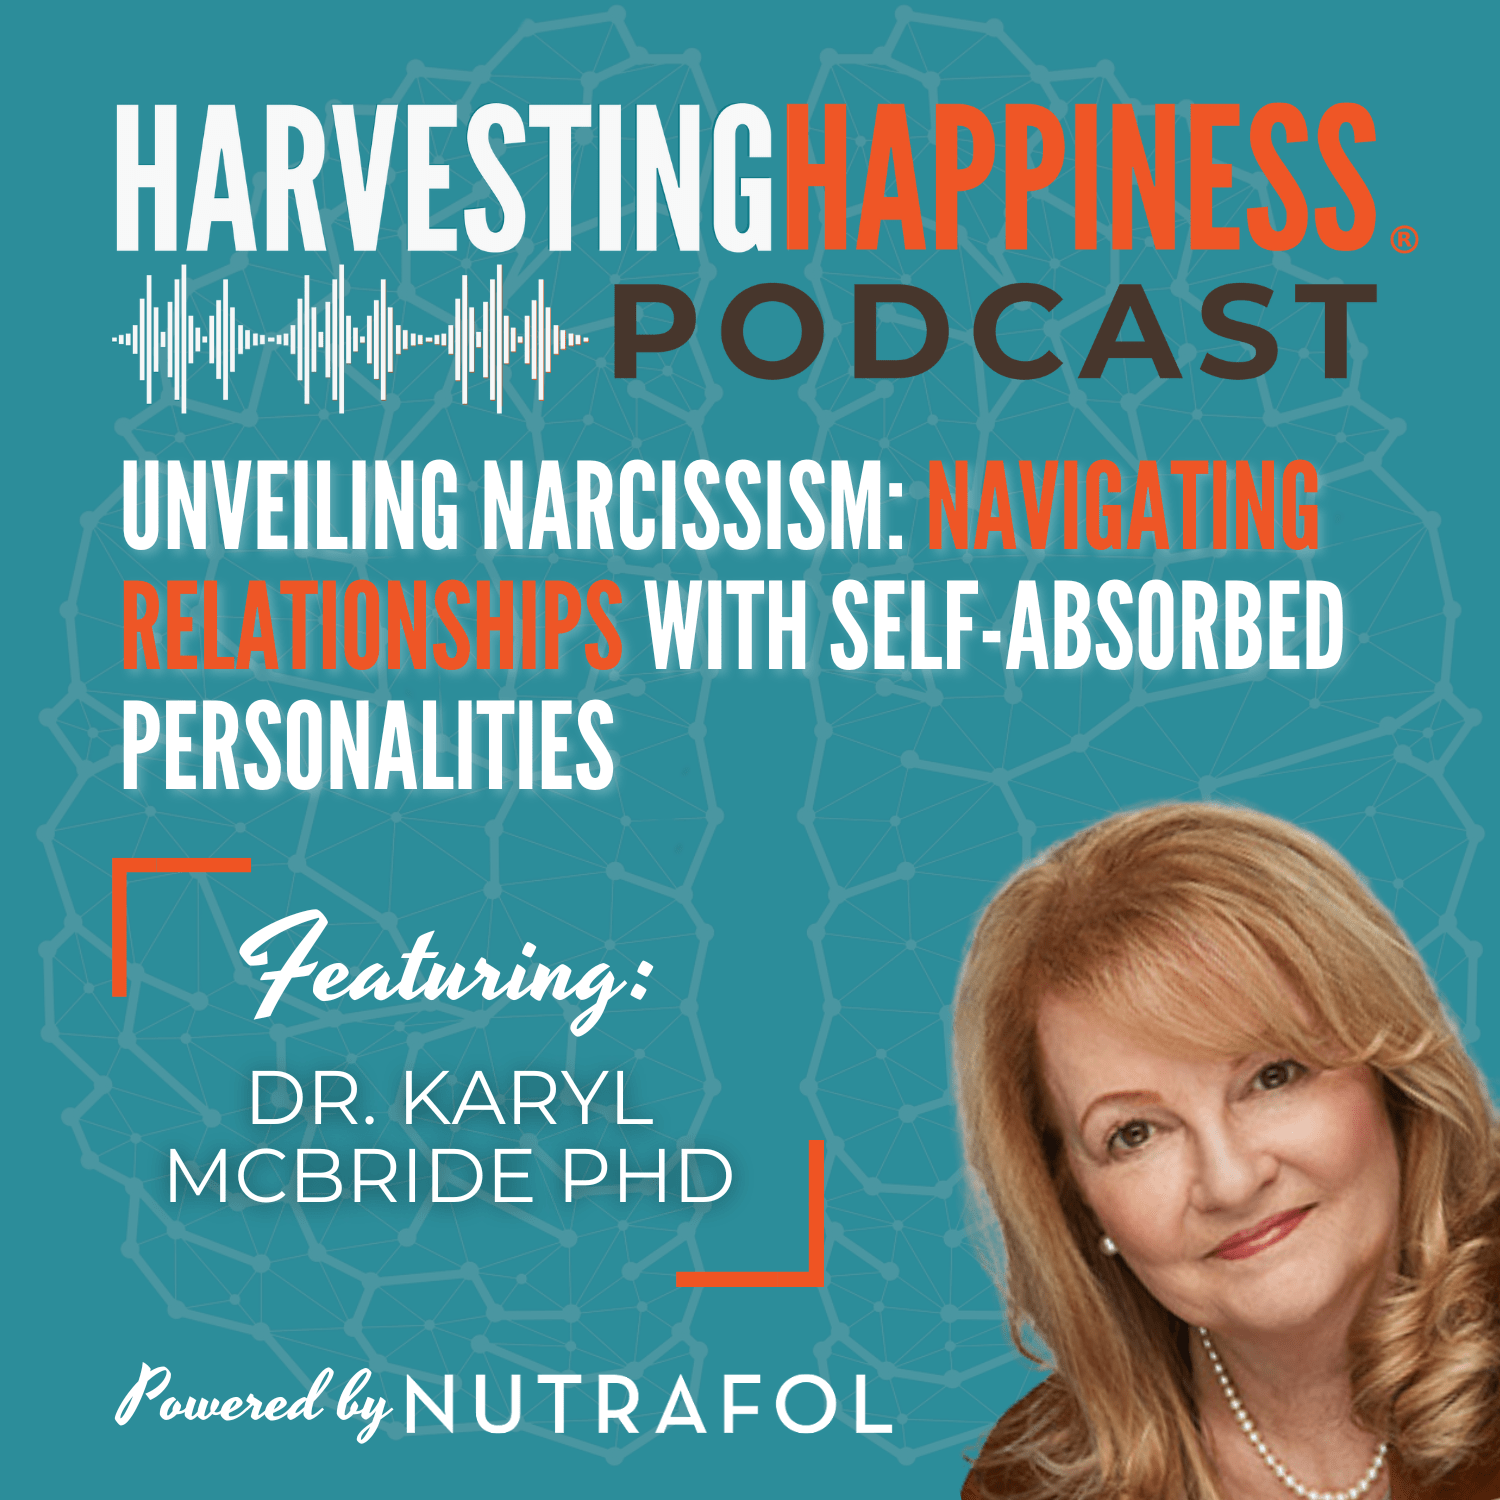 Relationships with Self-Absorbed Personalities with Dr. Karyl McBride PhD, LMFT